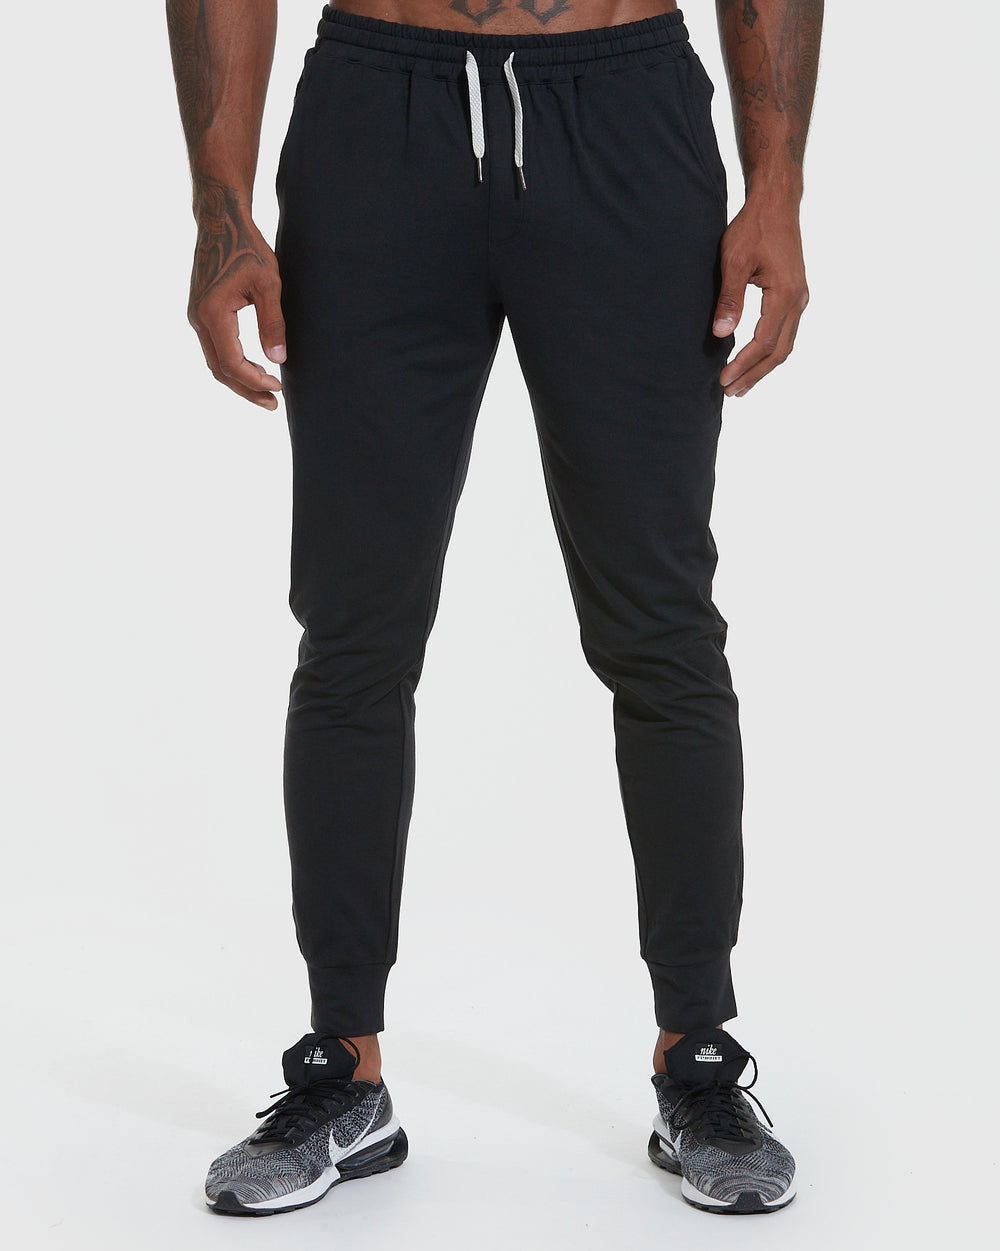 Gym Stretchable Tight Hips Running Sports Pants Price in Nepal